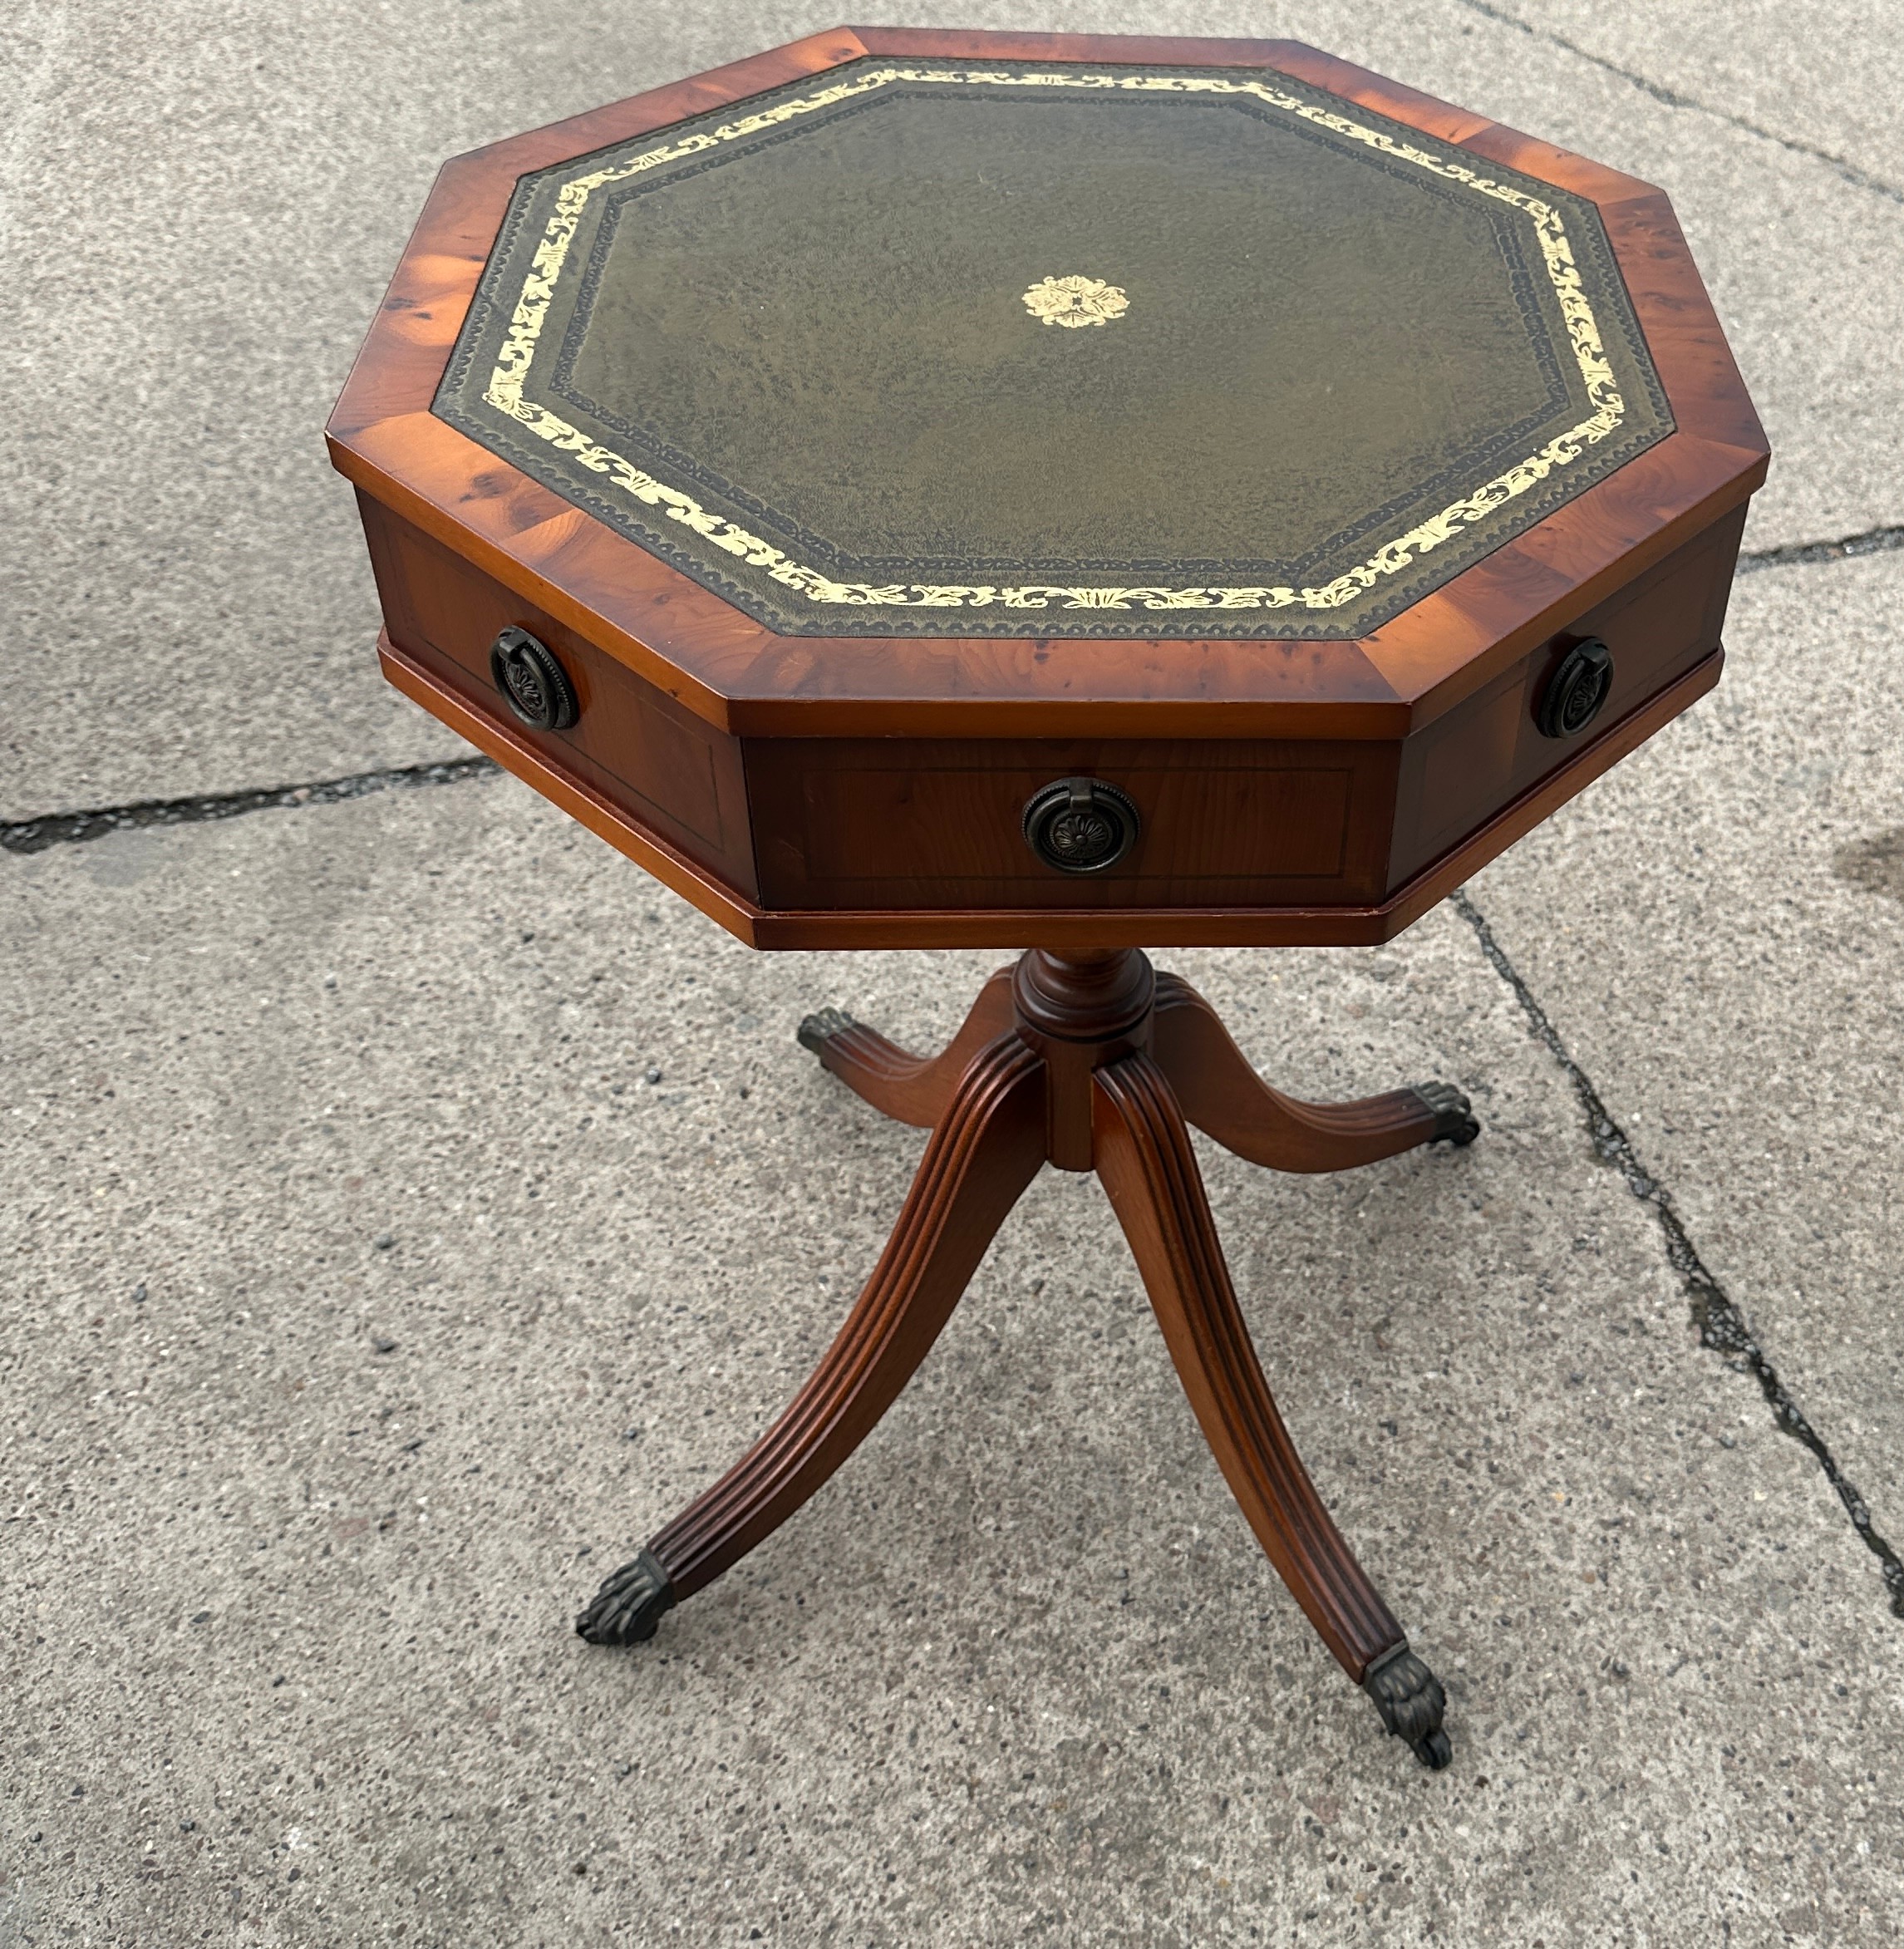 Reproduction leather topped drum table measures approx 26 inches tall